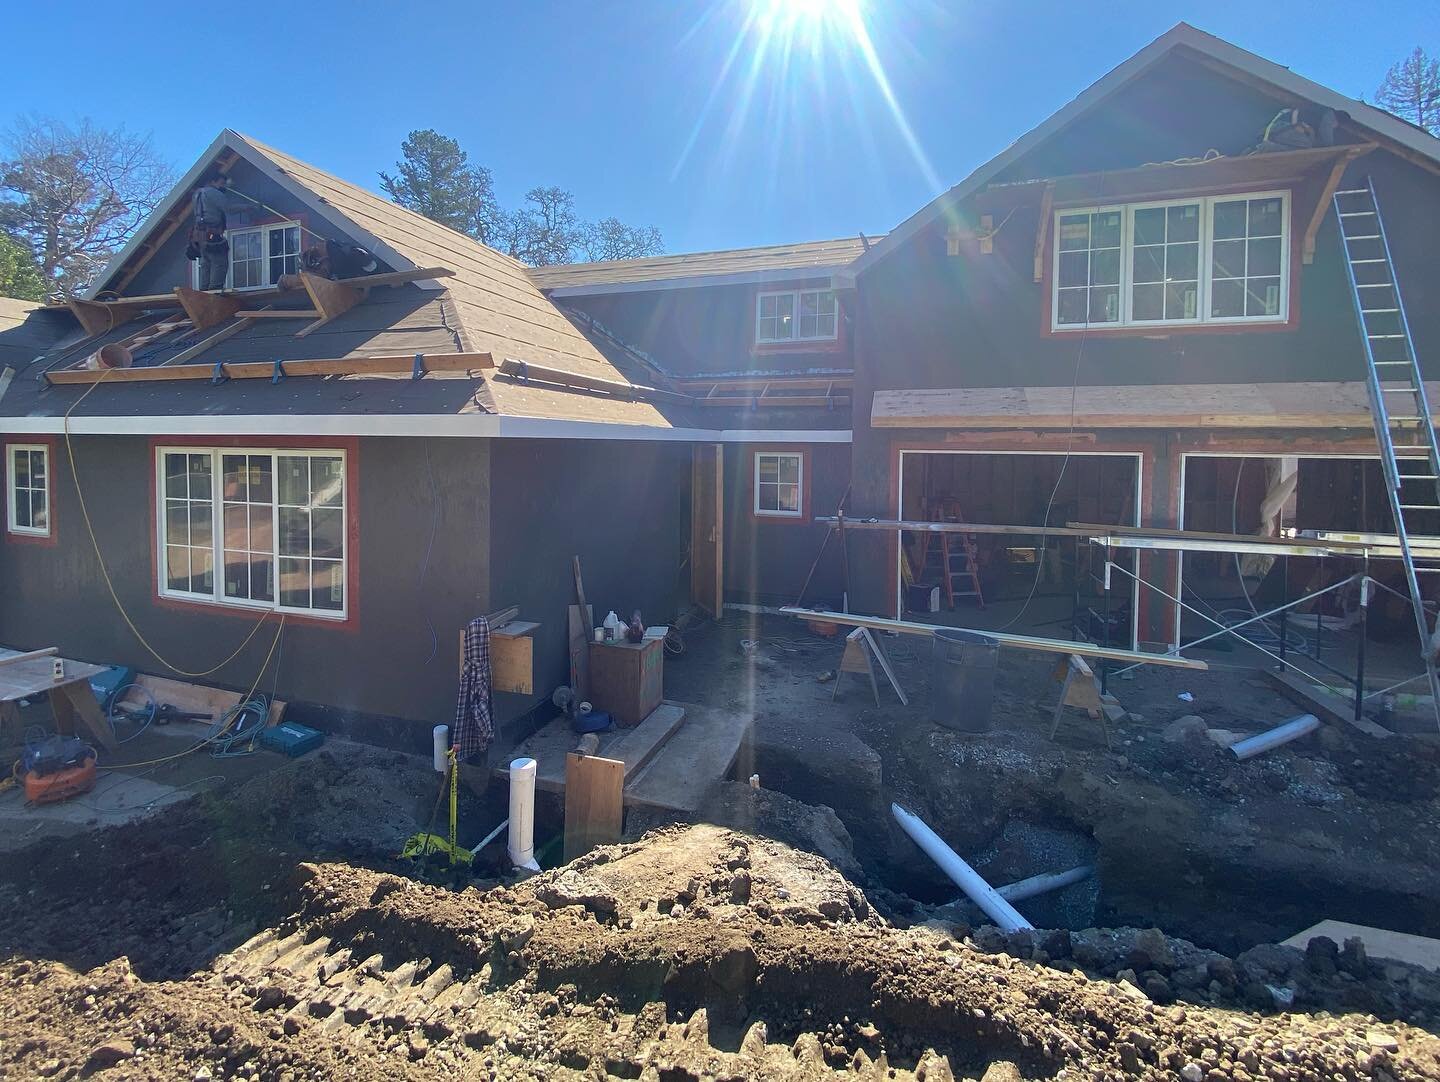 Some eave work and gypcrete at our project in Ross. Everyone is working hard and the house is coming to life! #sfcontractors #sanfranciscocontractor #sanfranciscobuilders